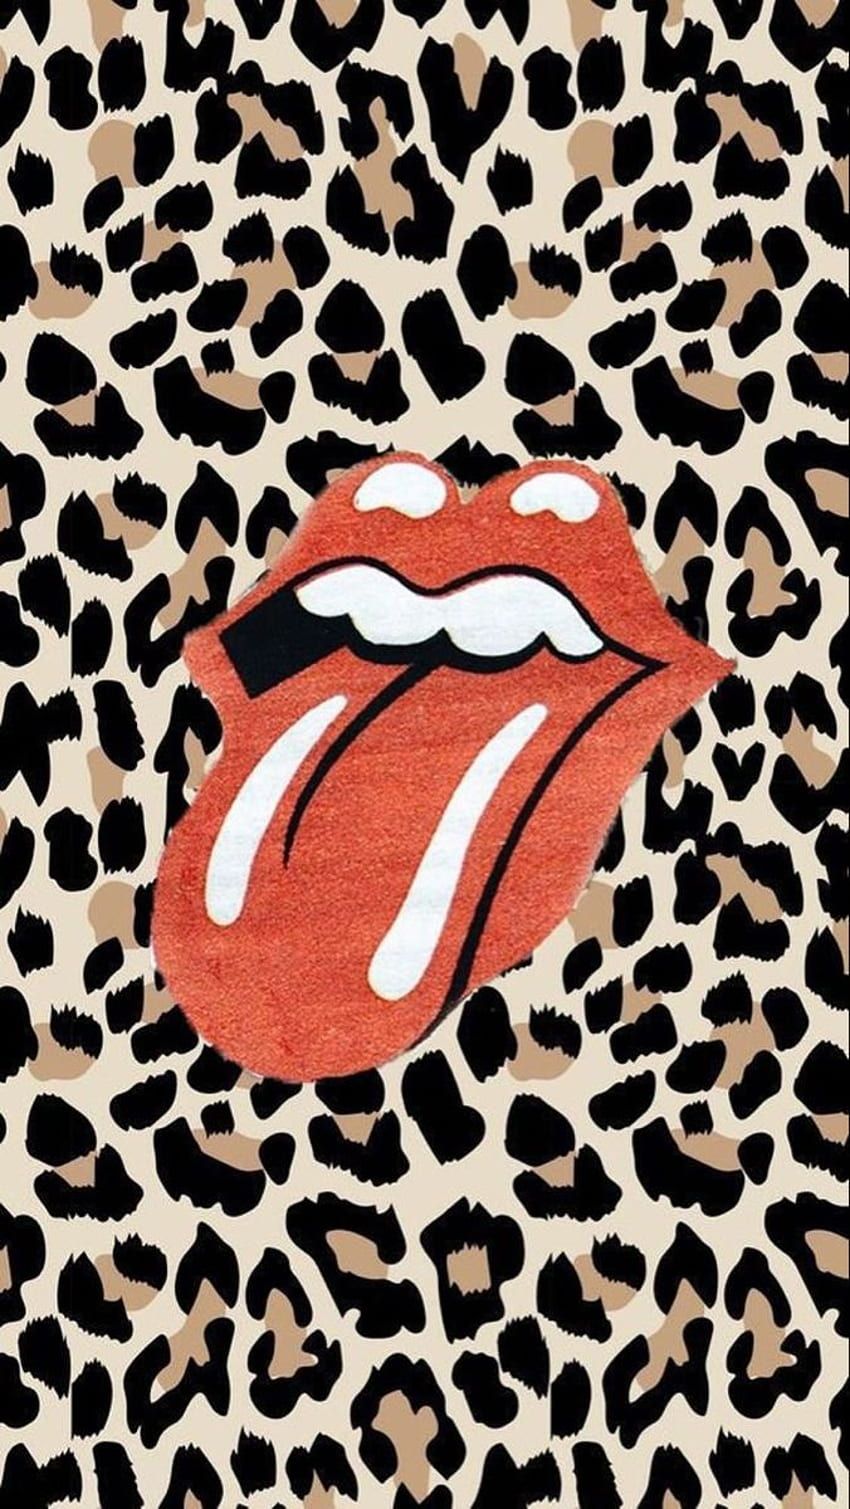 The rolling stones rolling stones wallpaper - Rolling Stones